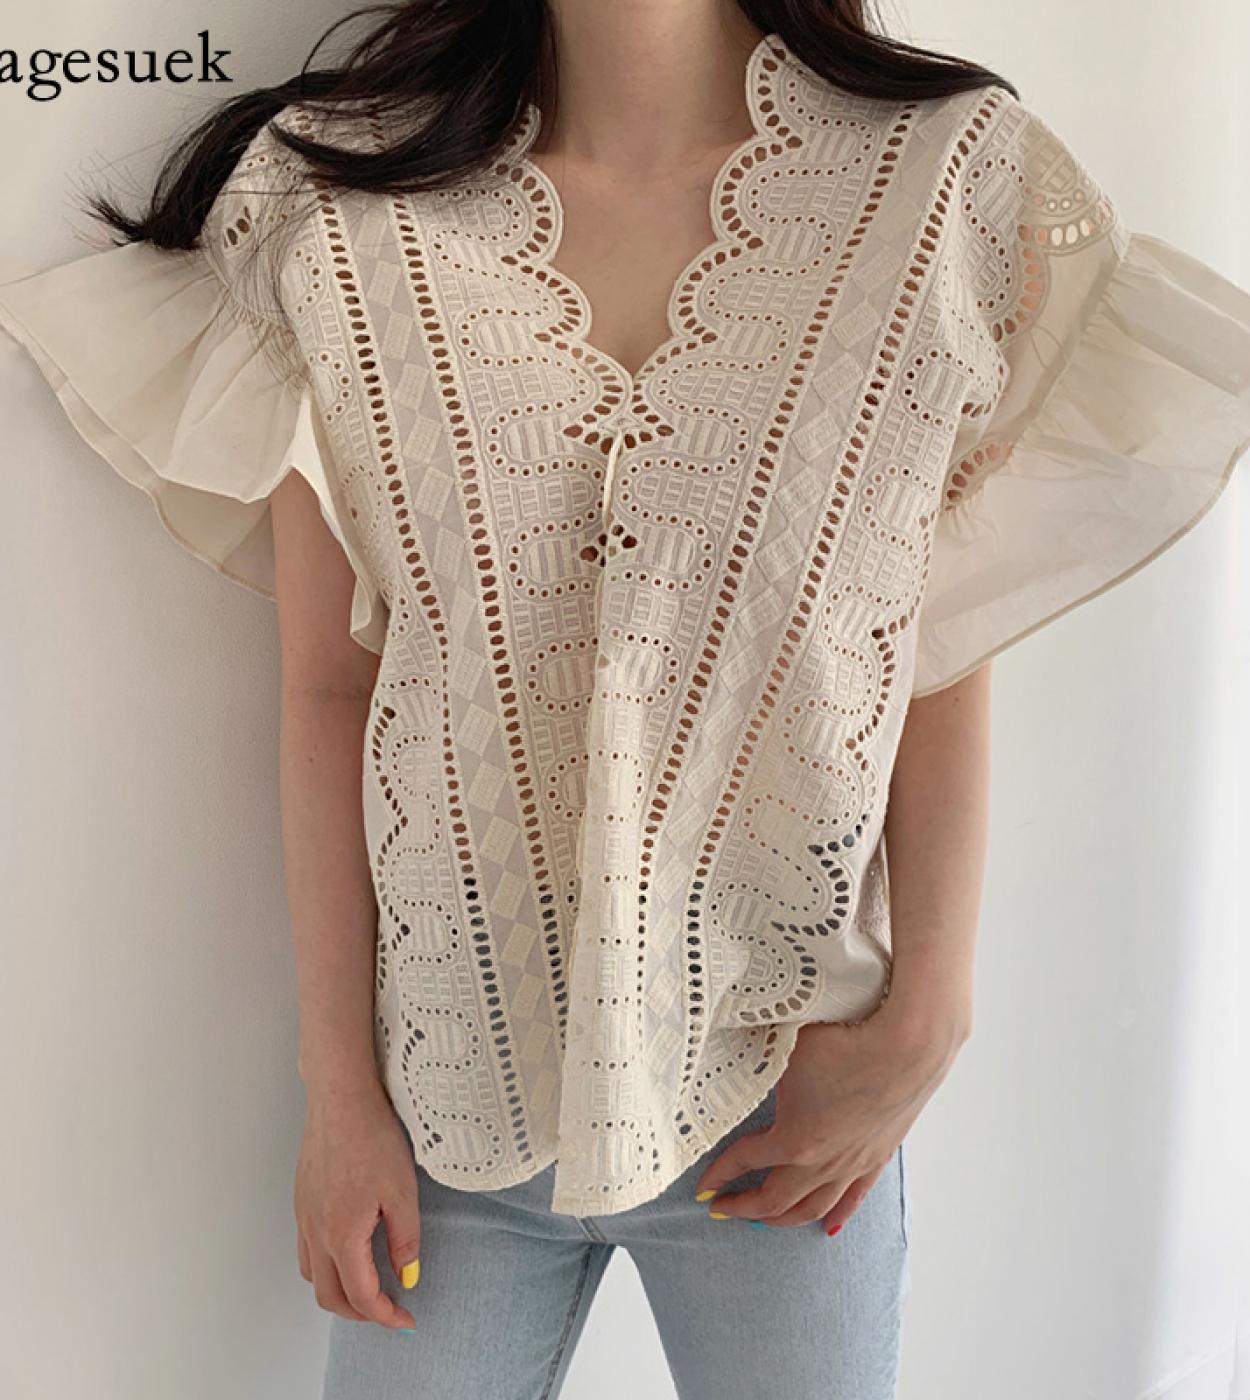  Vneck  New Casual Shirt  Fashion White Blouse Summer Hollow Out Embroidery Vneck Shirt Woman Clothing 14192  Women Blou